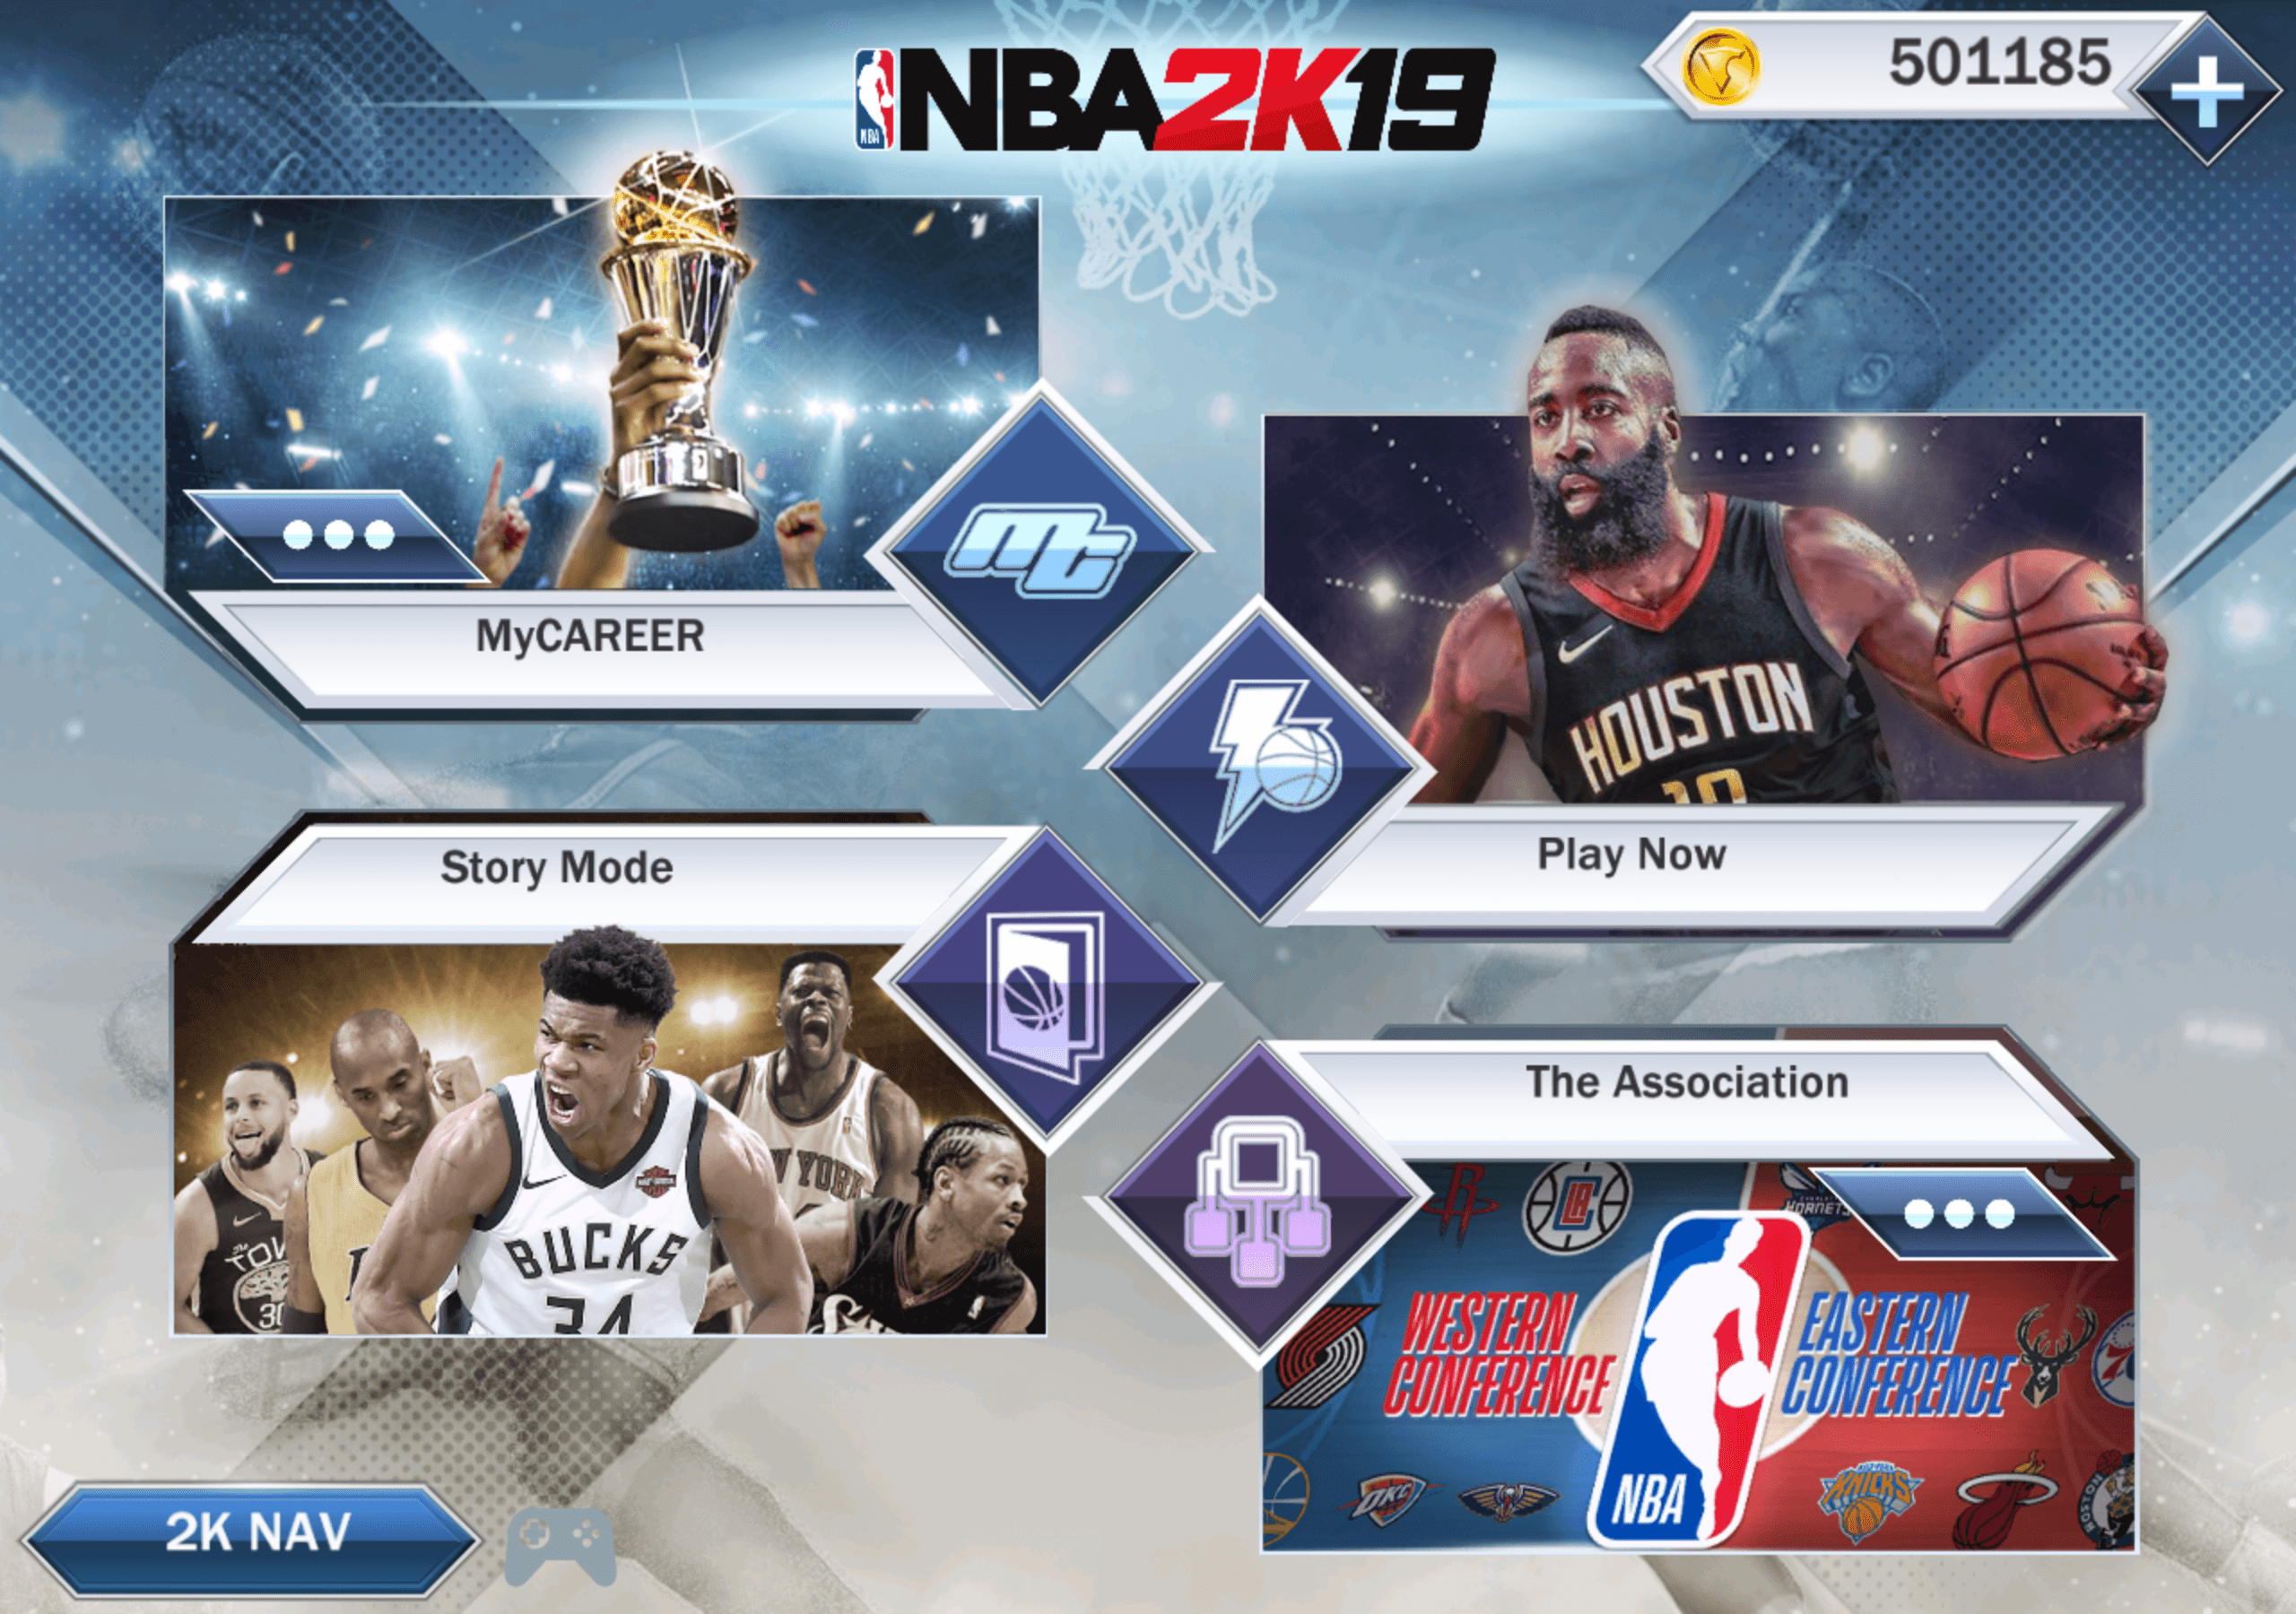 Download NBA2K19 on PC with BlueStacks2560 x 1800